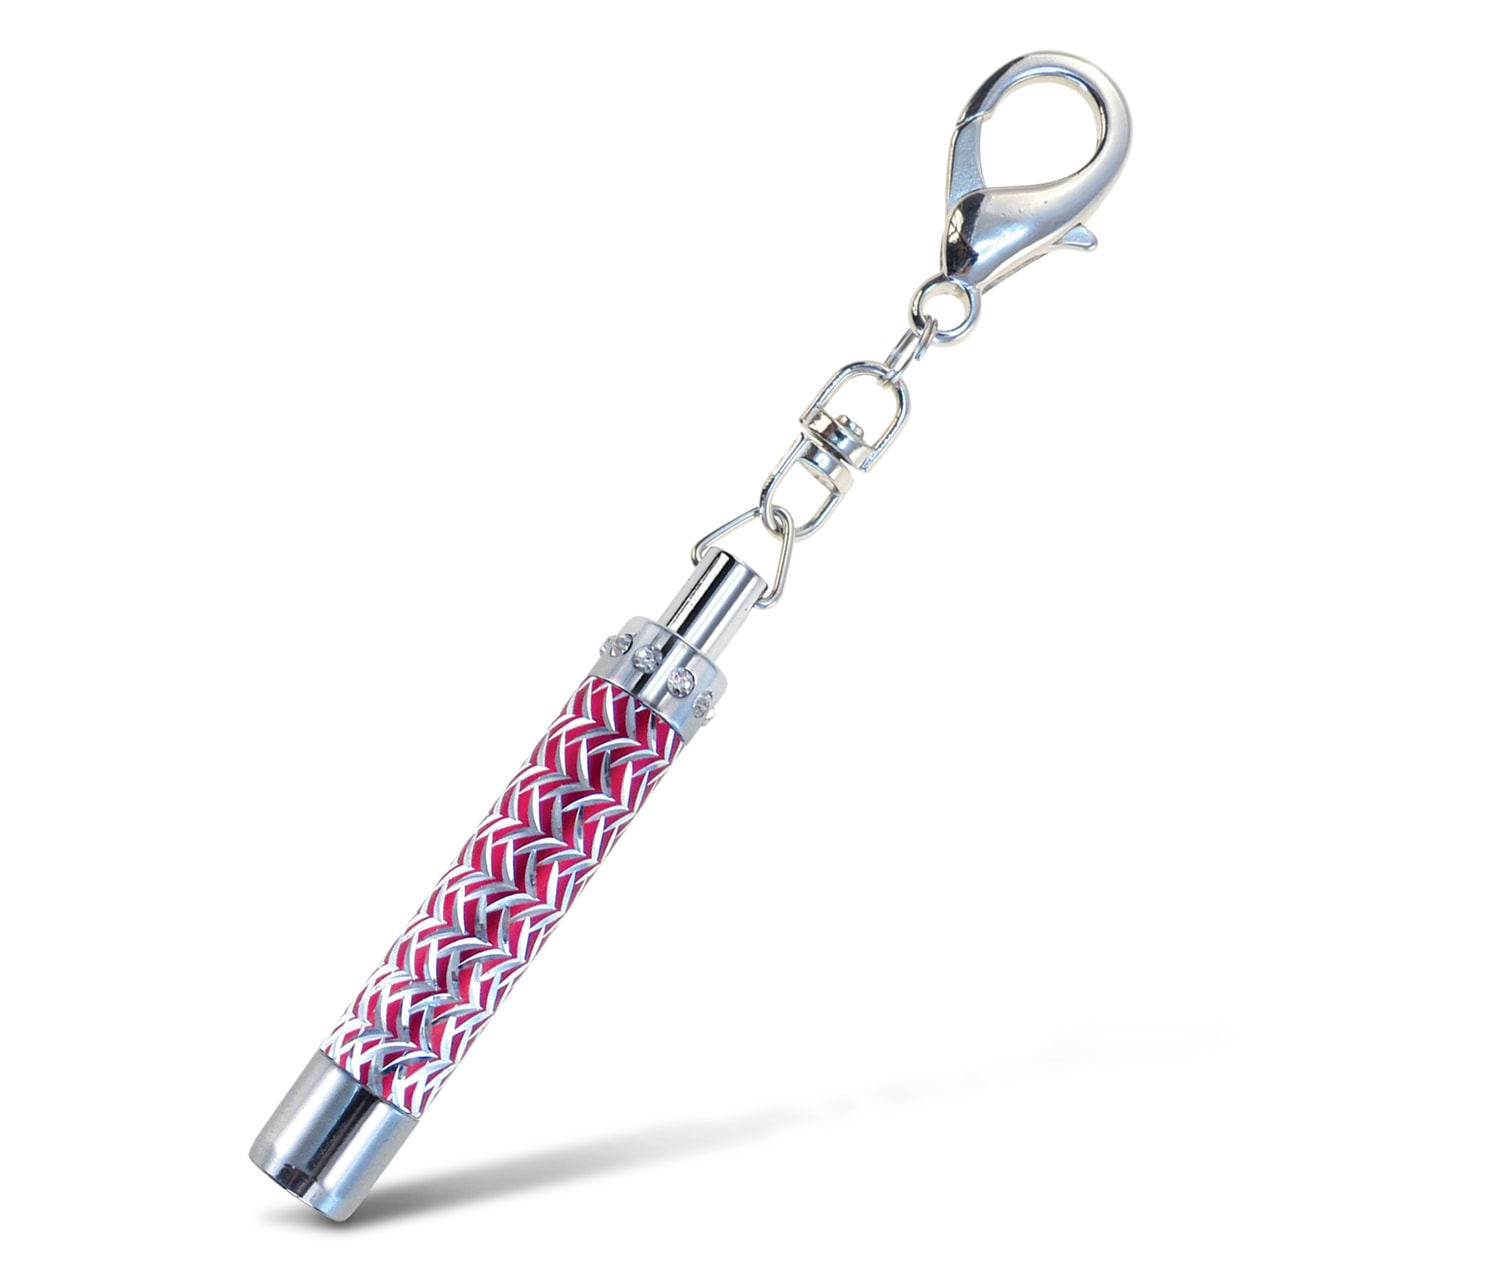 Engraved With Wave Pattern Red – Sparkling Flashlight